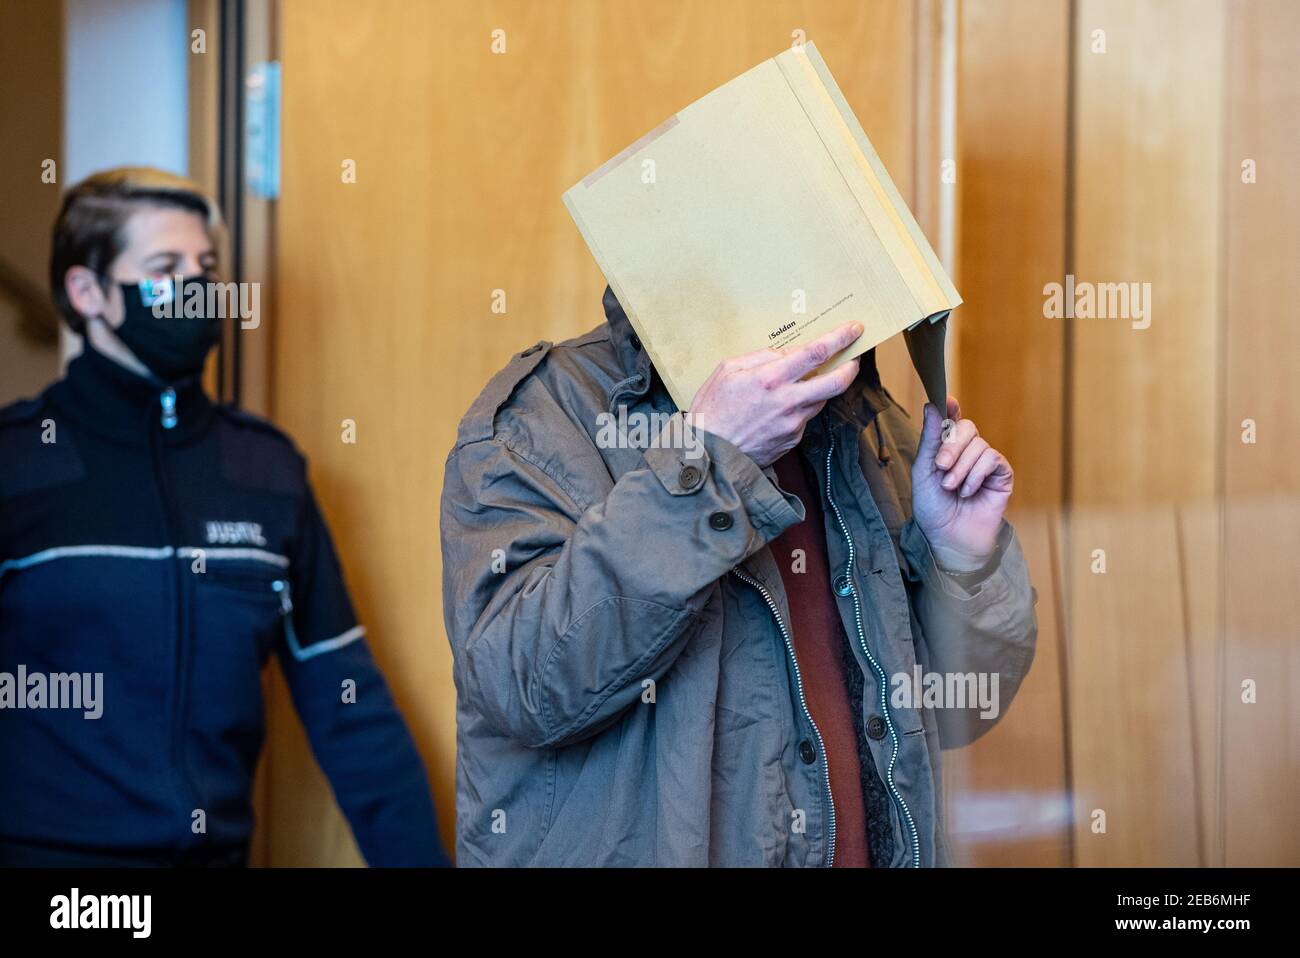 North Rhine-Westphalia, Münster, 12 February 2021: The 50-year-old defendant from Hanover enters a room at Münster Regional Court with a file in front of his face in the Münster abuse complex before the verdict is announced. He is alleged to have severely sexually abused the foster son of the 27-year-old main defendant in an apartment at his residence in the fall of 2019. Further trials in the matter are pending at the Münster Regional Court. Judgments are not expected here until the spring. Credit: dpa picture alliance/Alamy Live News Stock Photo